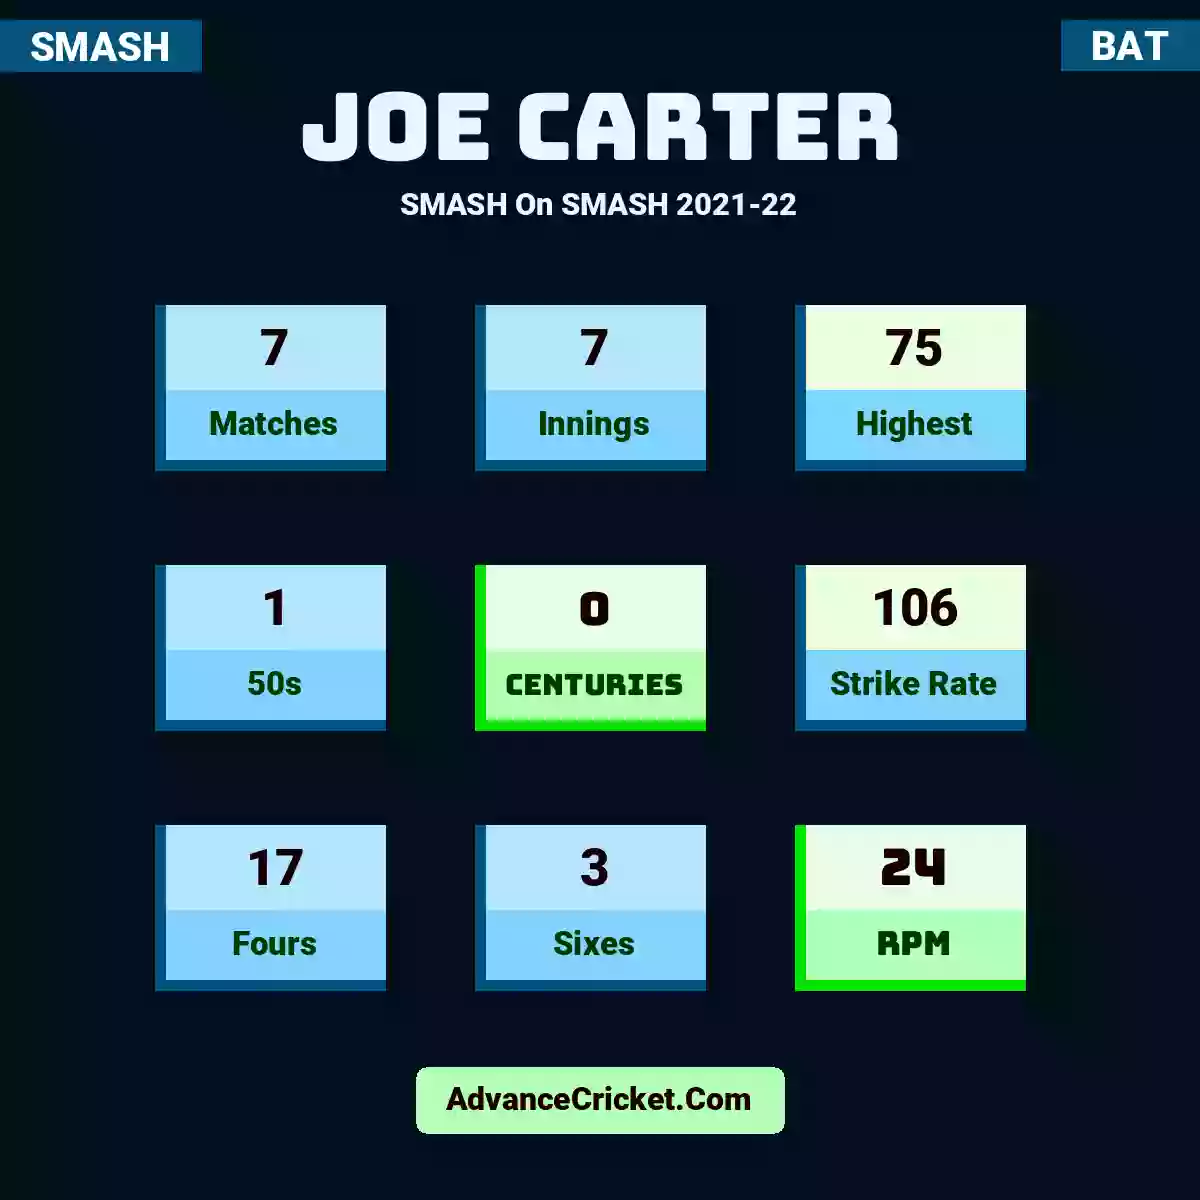 Joe Carter SMASH  On SMASH 2021-22, Joe Carter played 7 matches, scored 75 runs as highest, 1 half-centuries, and 0 centuries, with a strike rate of 106. J.Carter hit 17 fours and 3 sixes, with an RPM of 24.